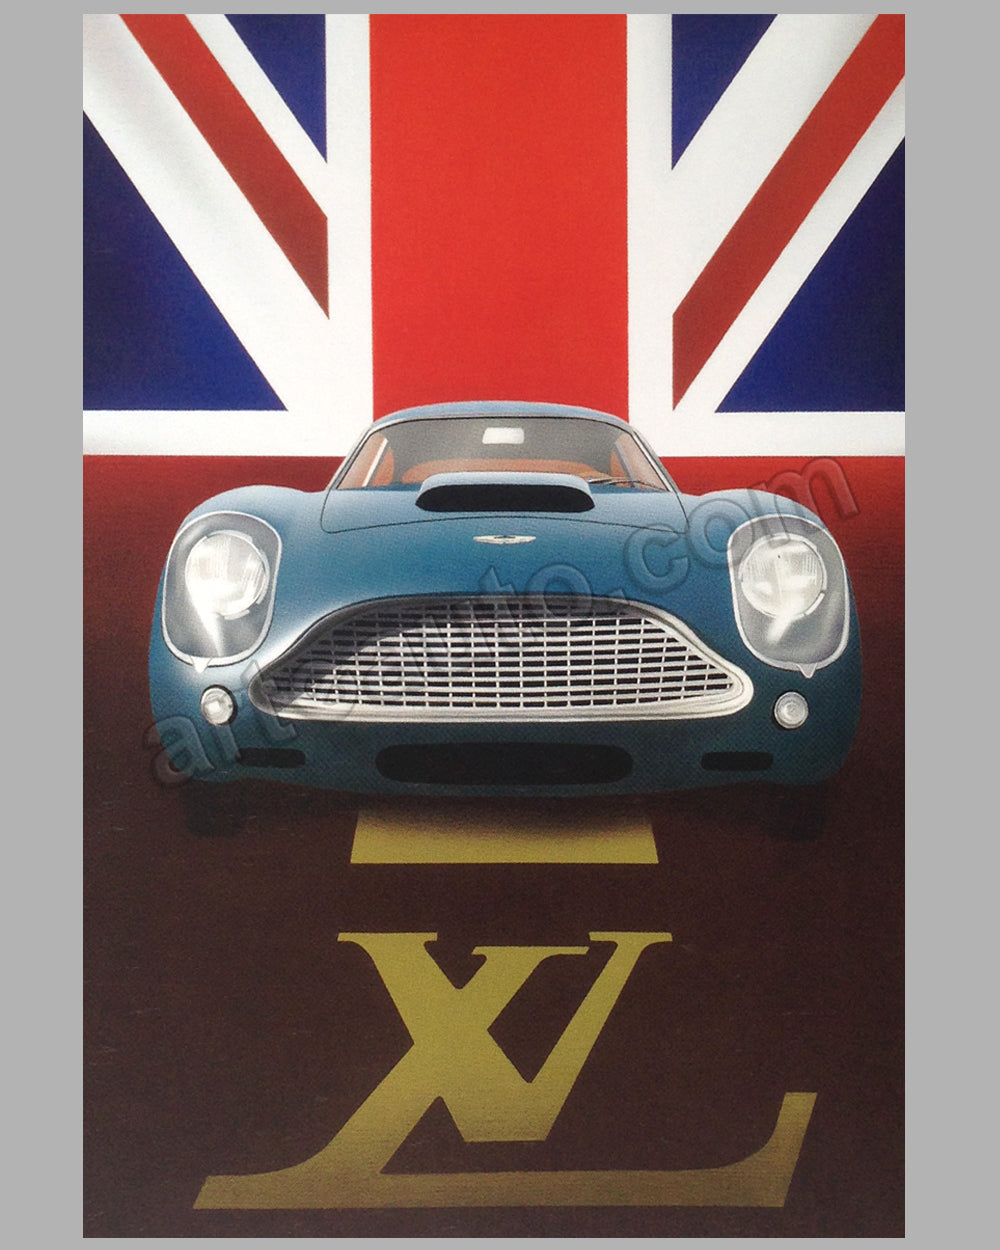 Louis Vuitton Classic 2004 Waddesdon Manor poster by Razzia - l 